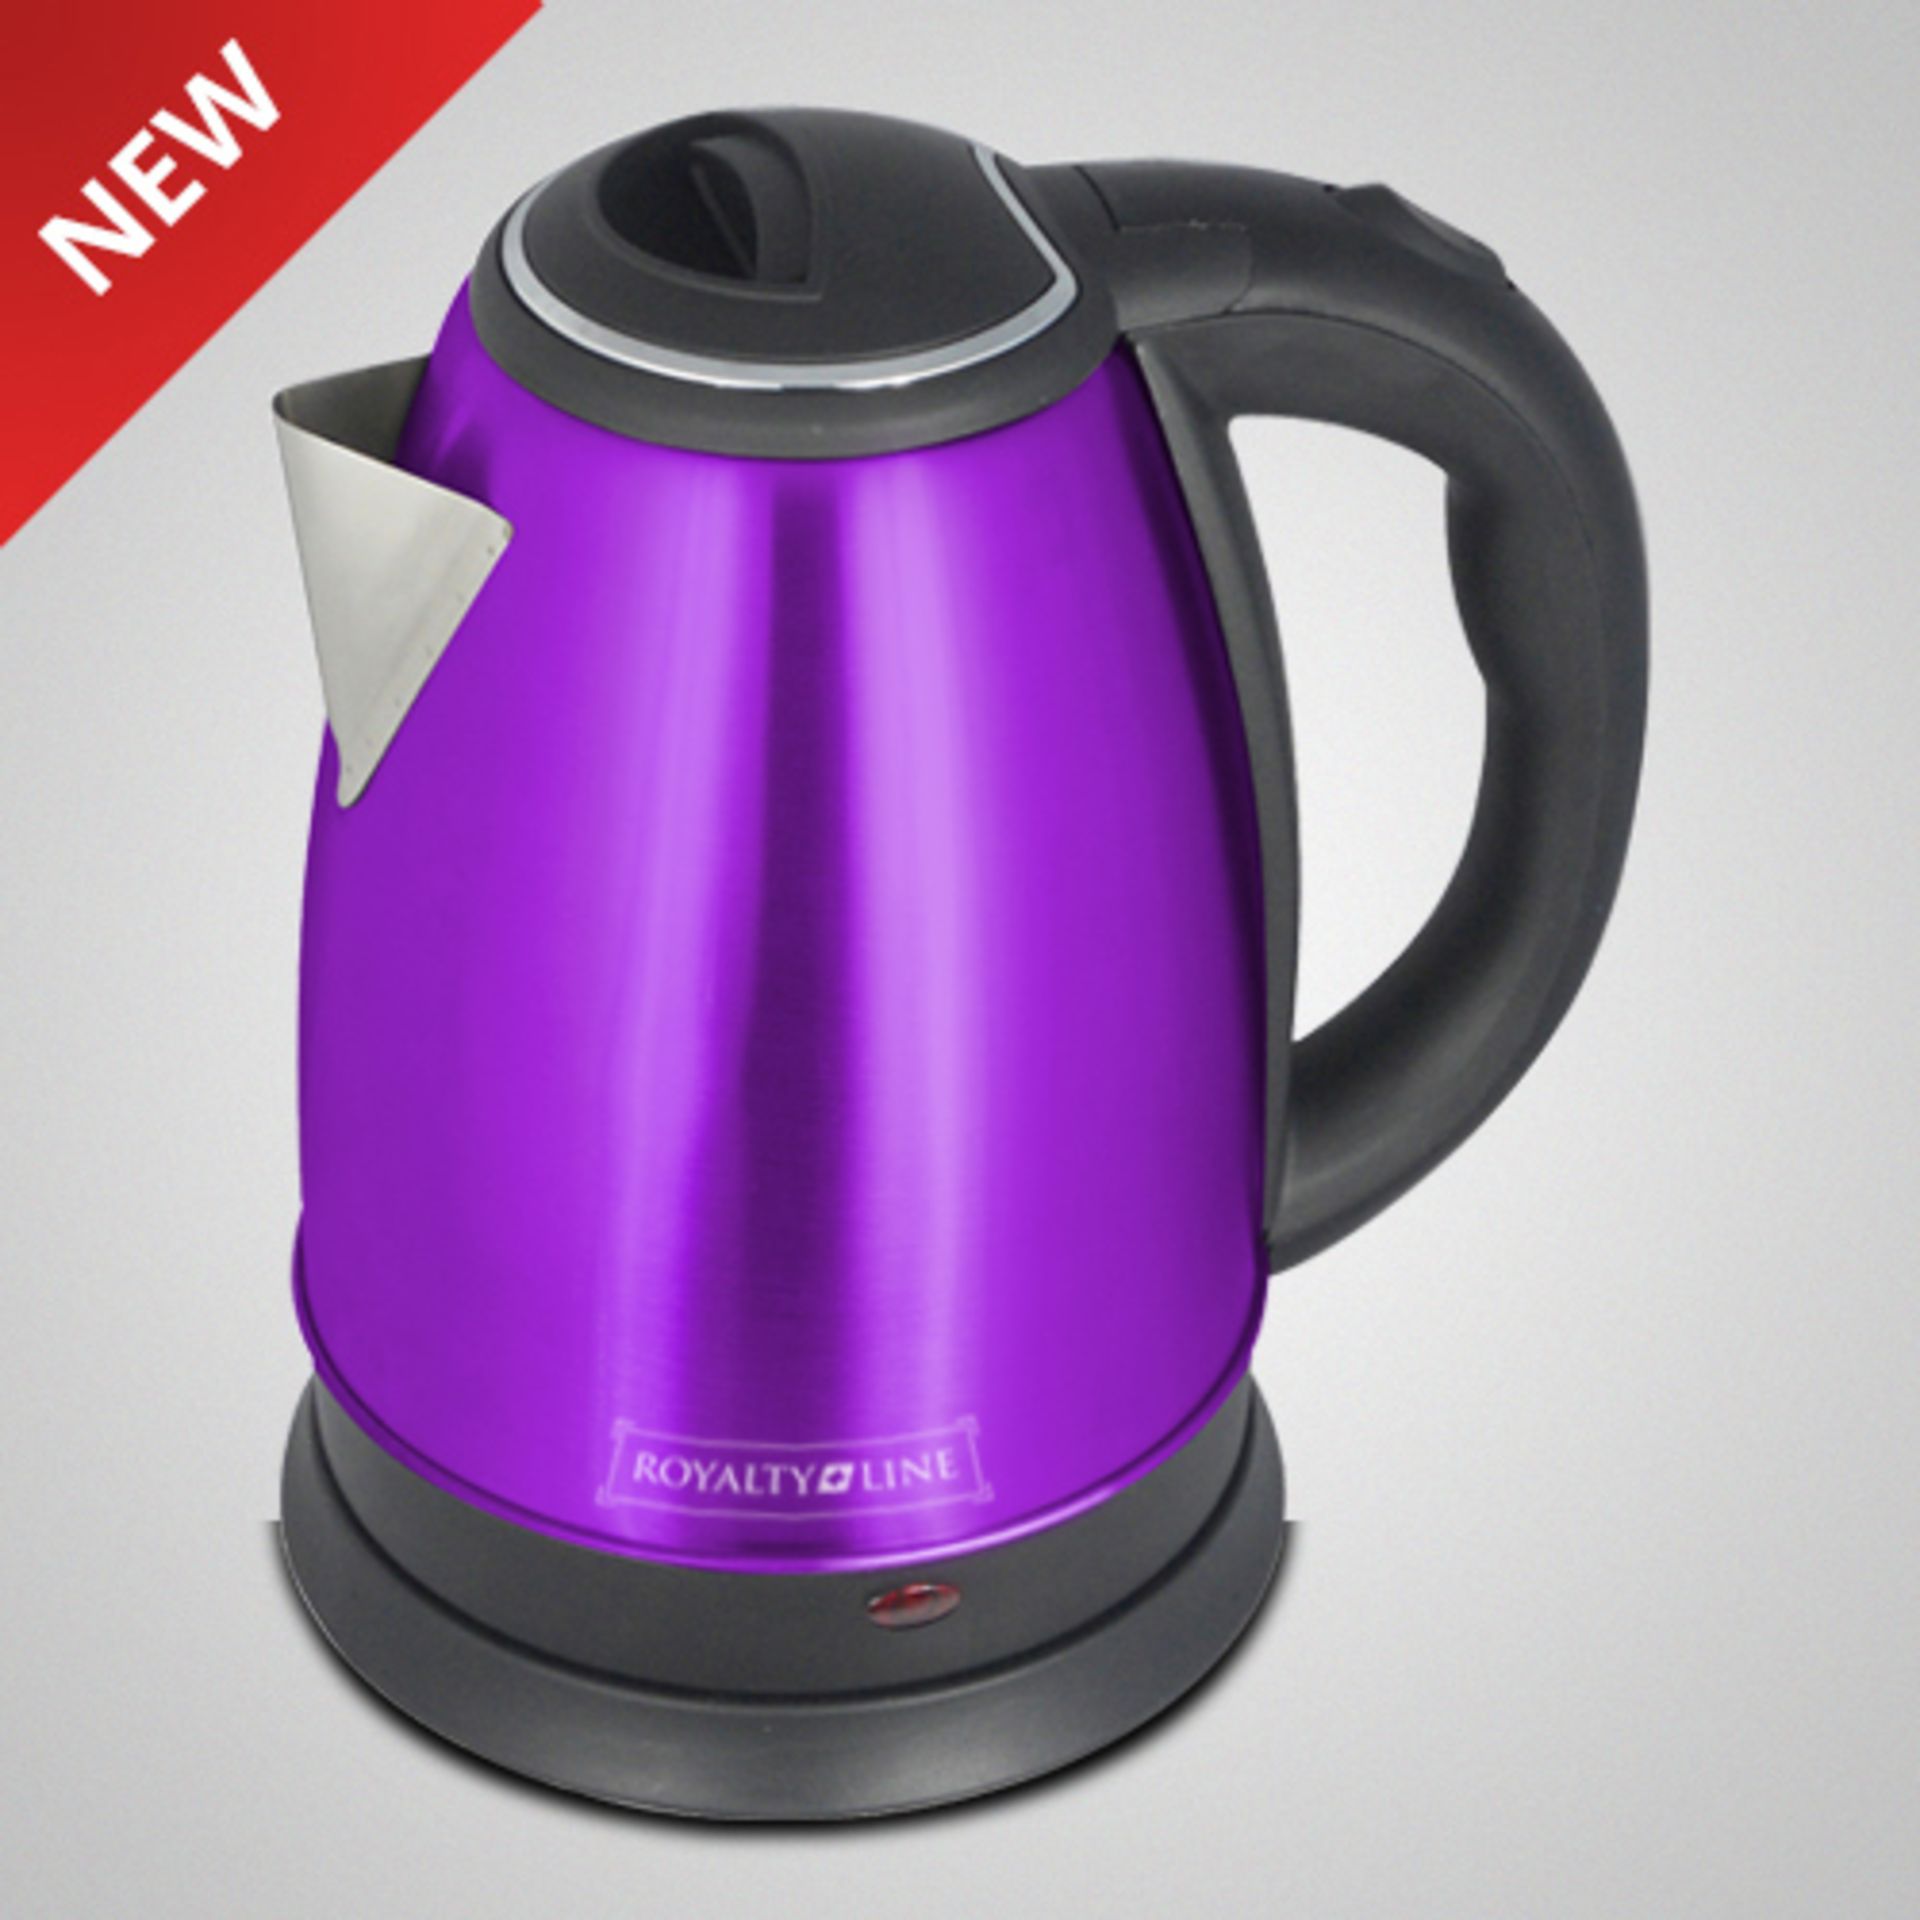 V Brand New Royalty Stainless Steel (Purple) Electric Kettle 1.8L (Cont Plug) SRP £39.99 X 24  Bid